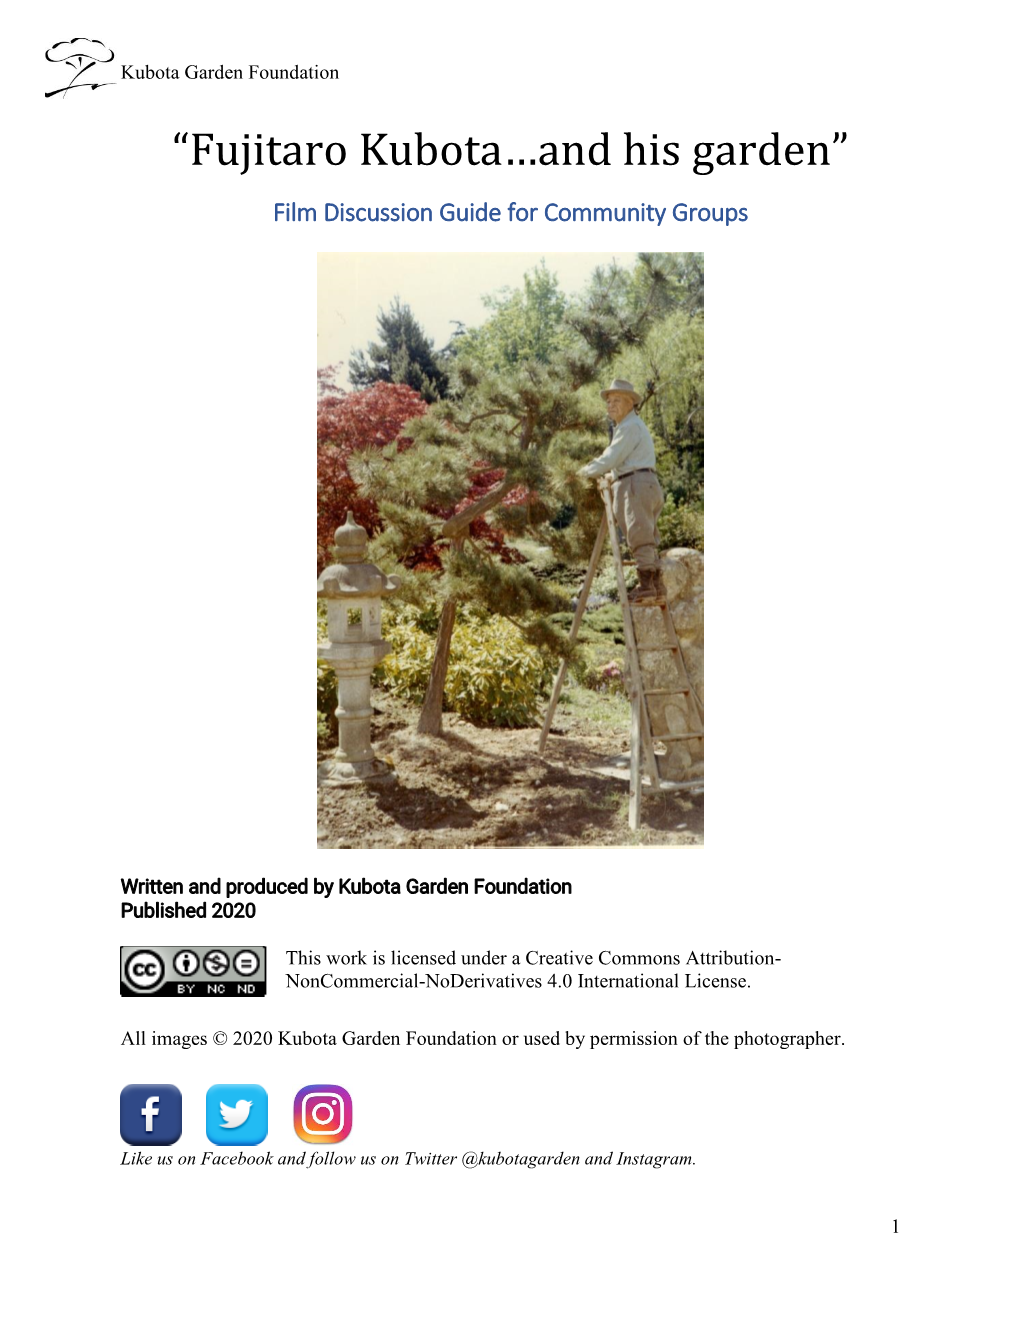 “Fujitaro Kubota…And His Garden” Film Discussion Guide for Community Groups